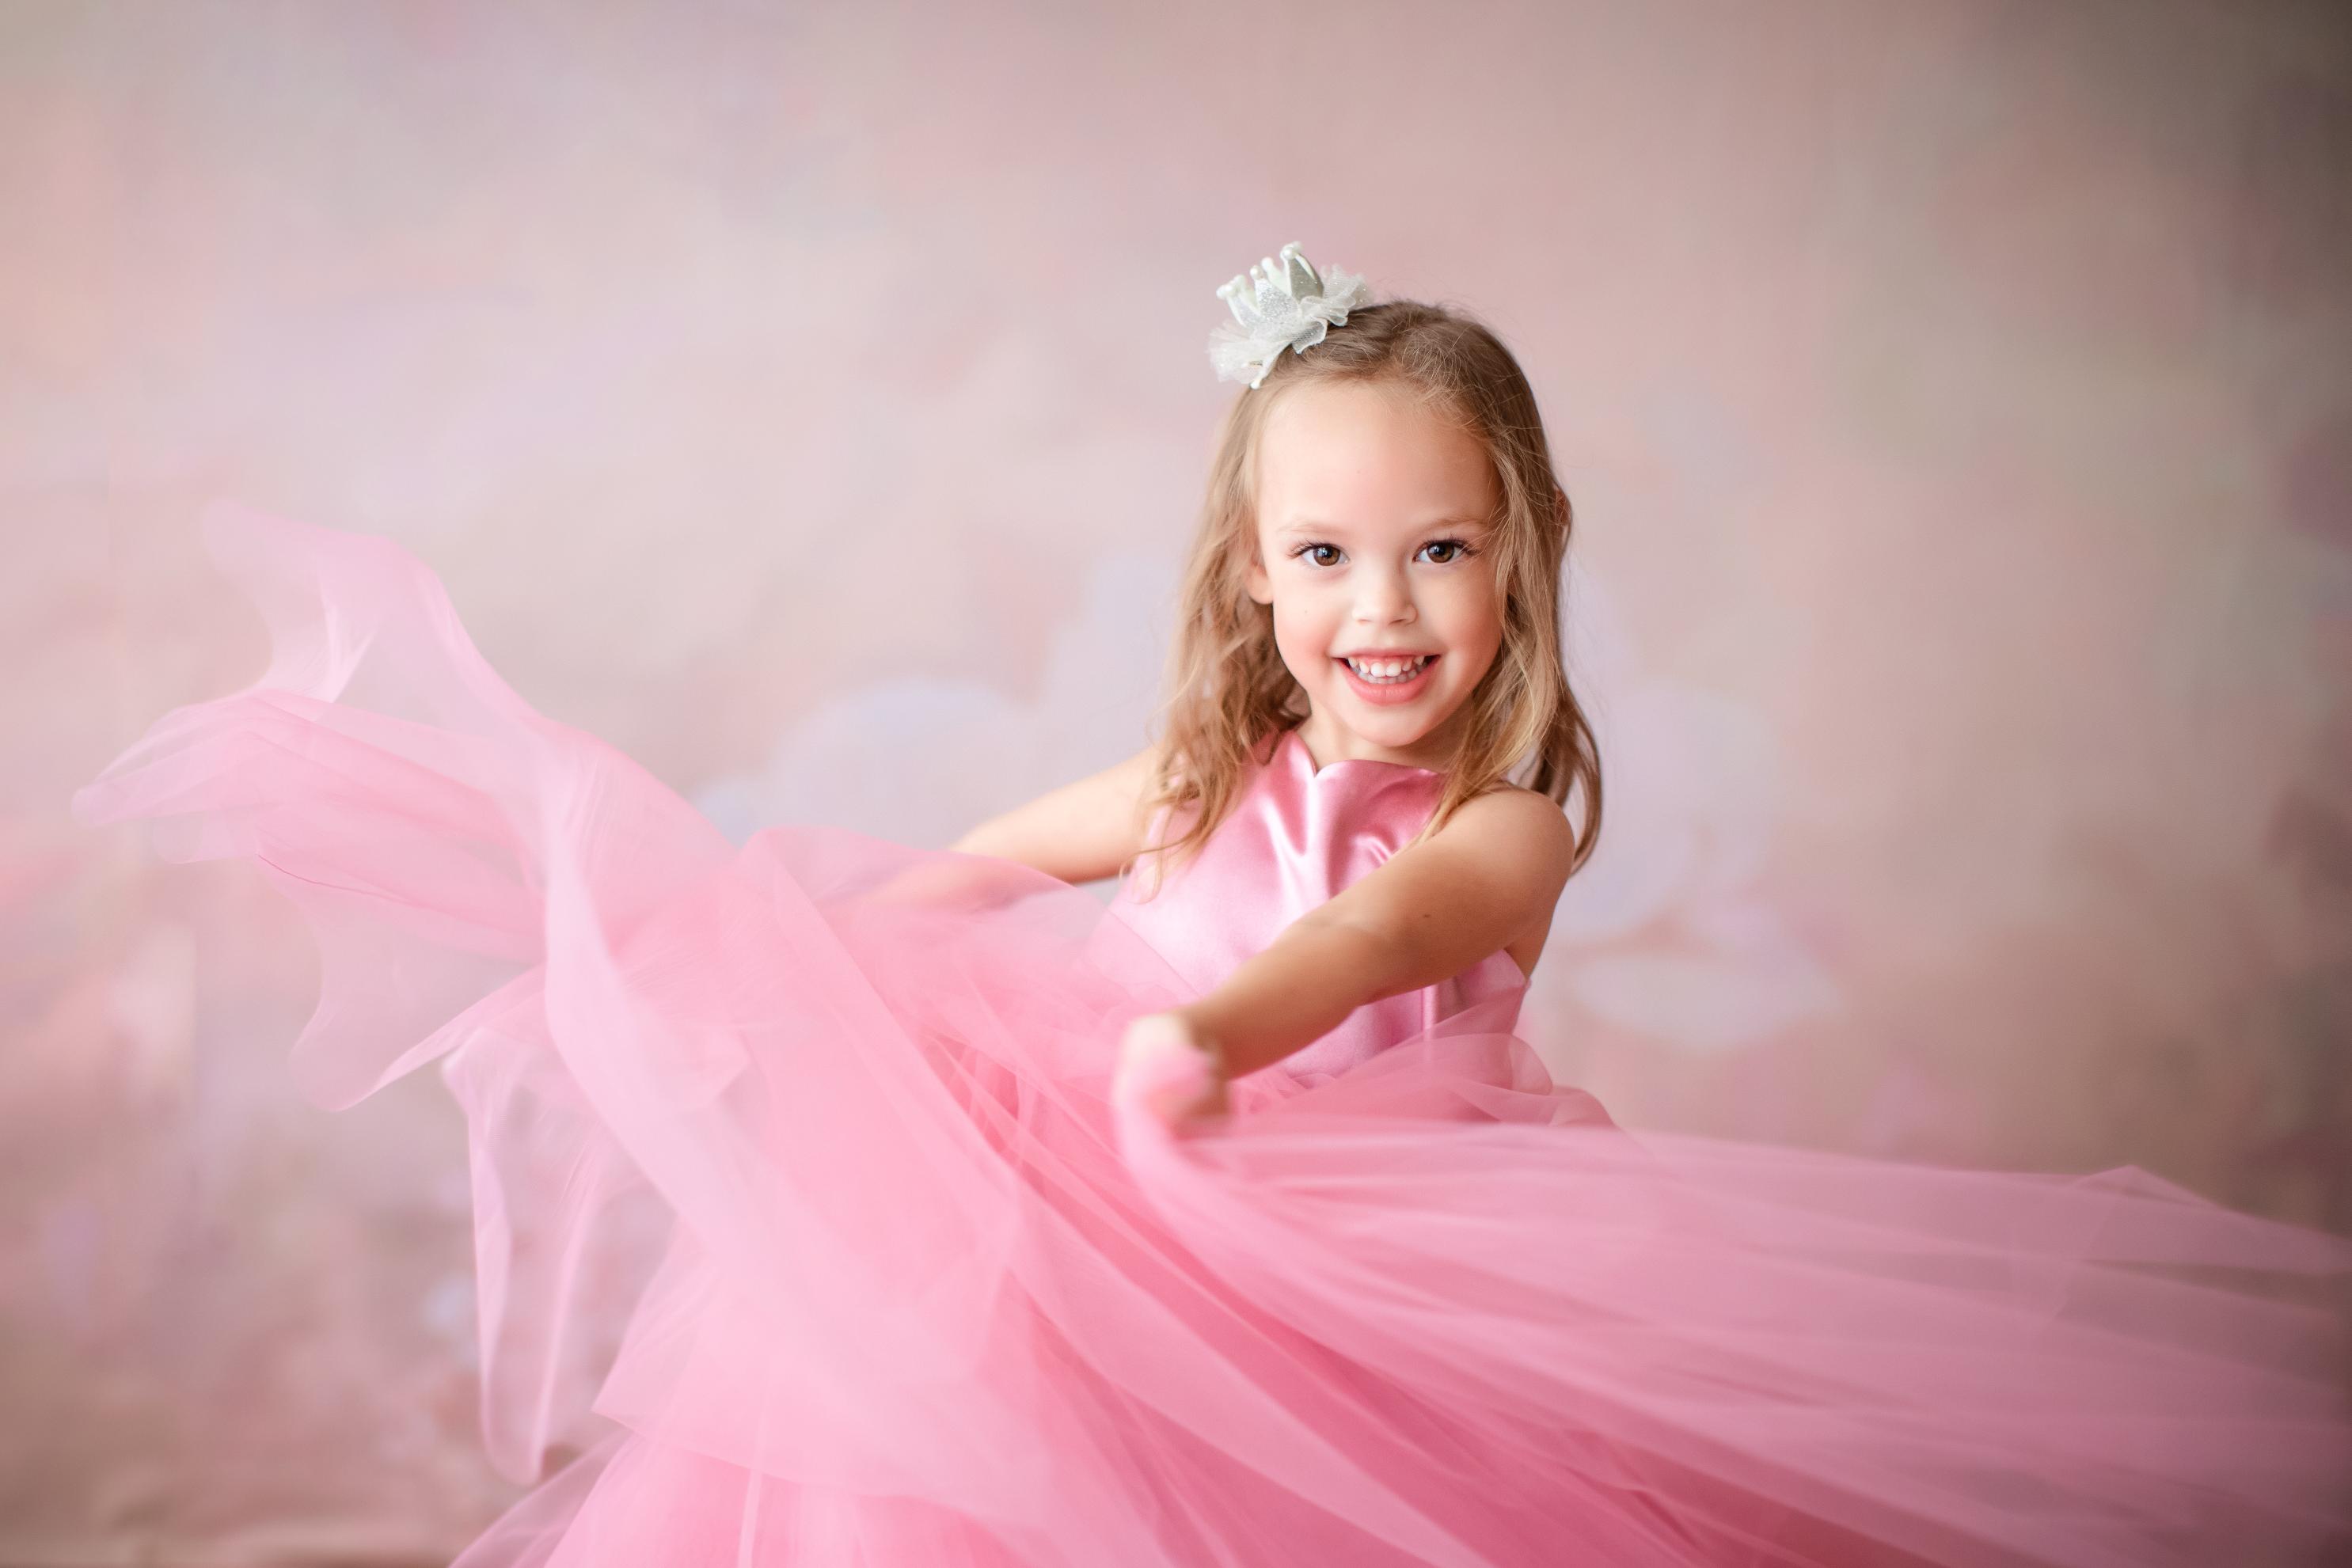 "Chic and timeless flower girl dress, designed to complement the bride's vision."